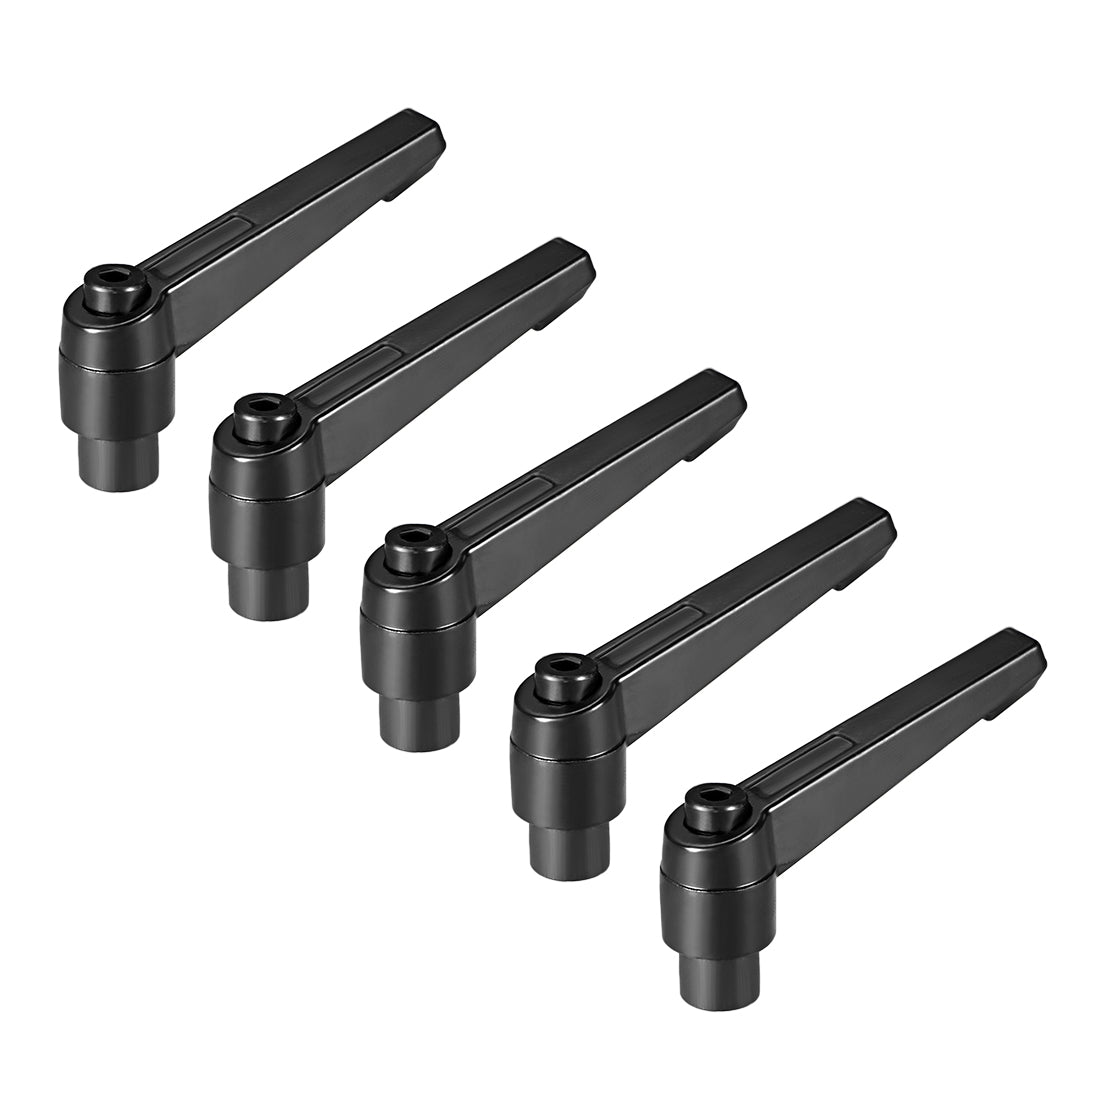 uxcell Uxcell M8 Handle Adjustable Clamping Lever Thread Push Button Ratchet Female Threaded Stud 5 Pcs